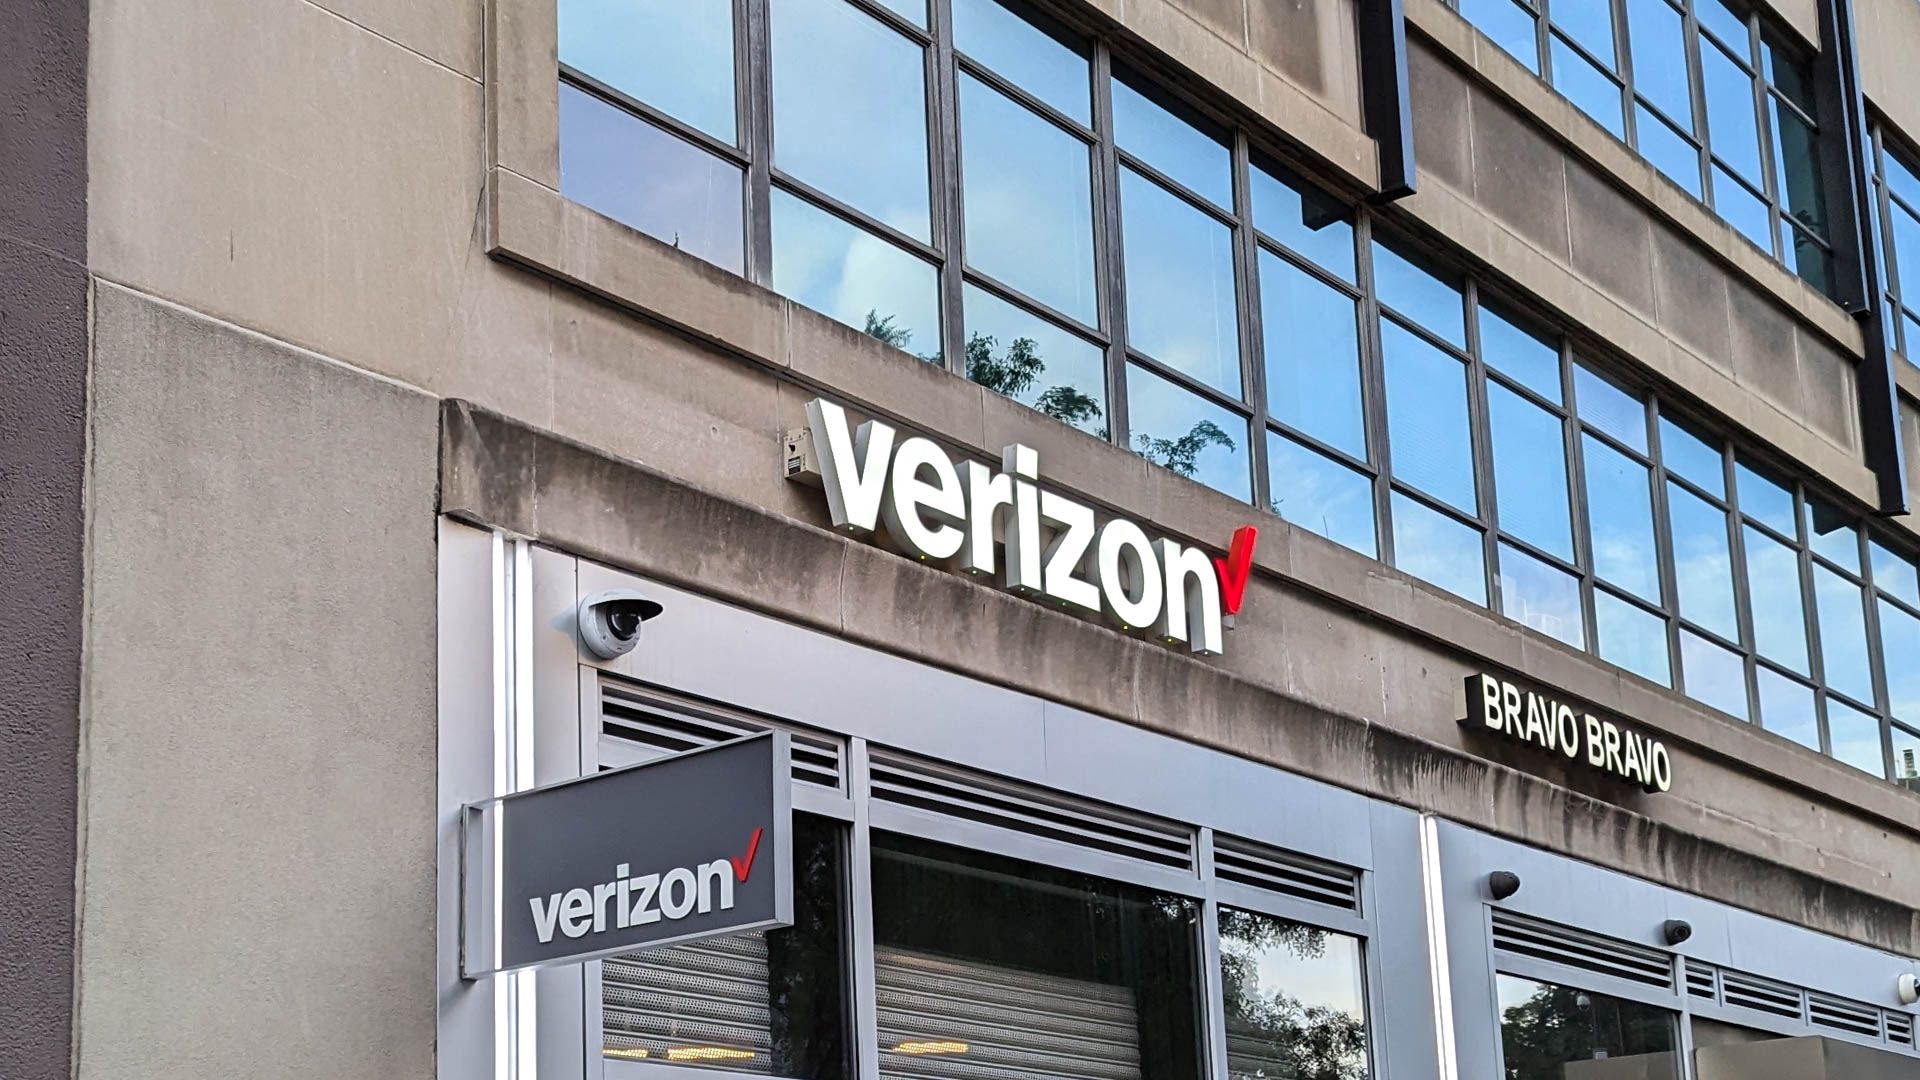 The front of a Verizon store in a city